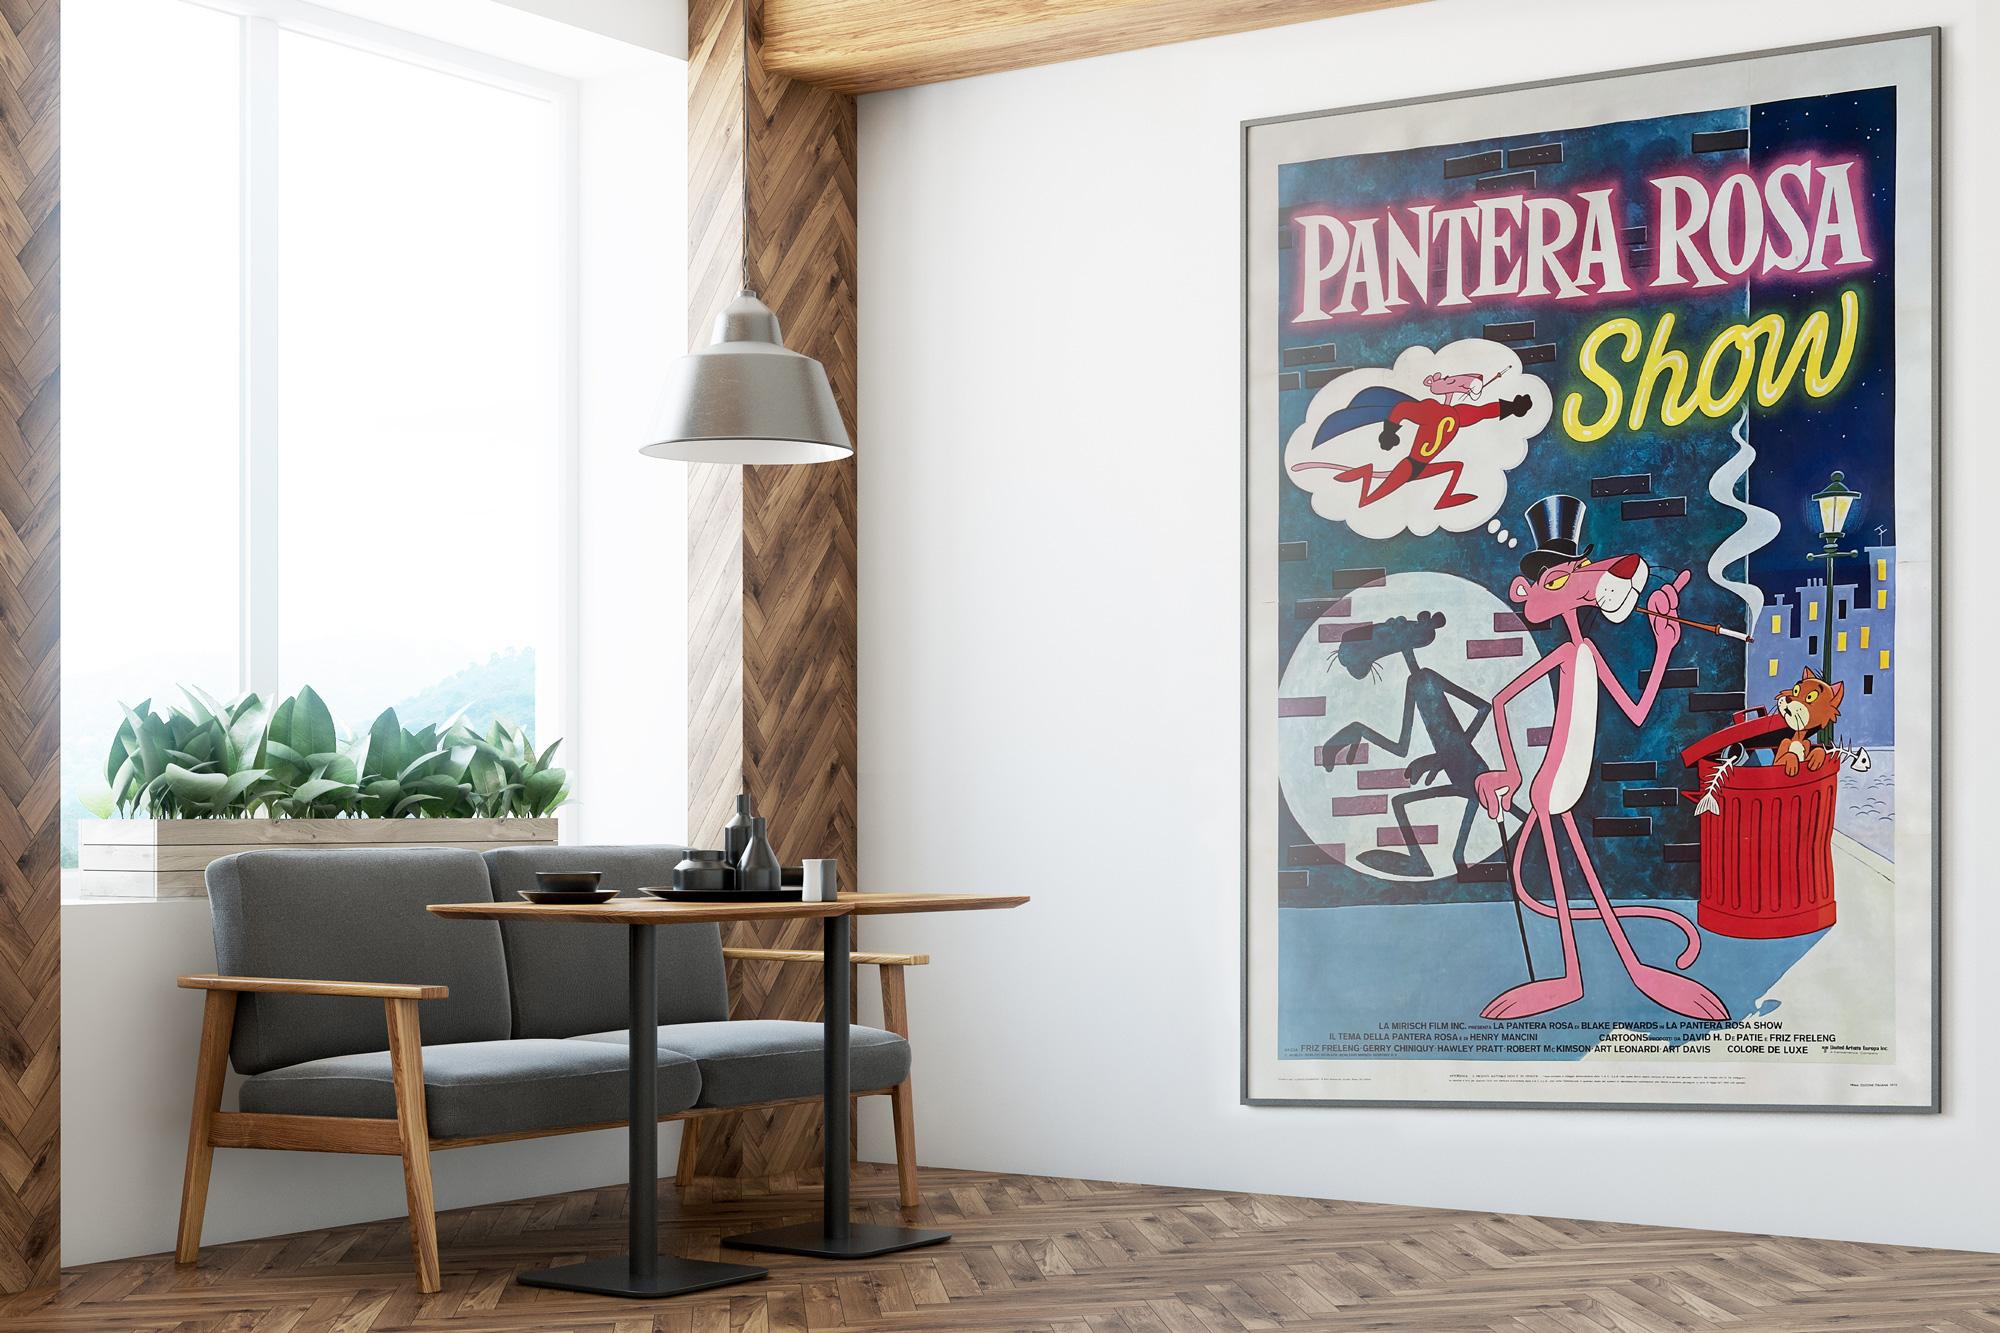 Fantastic original 1970s Italian film poster for the Pink Panther Show! Wonderful artwork and looks magnificent on the scale of this Italian 4 Foglio.

This vintage film poster was originally folded (as issued) in two sheets. It has been